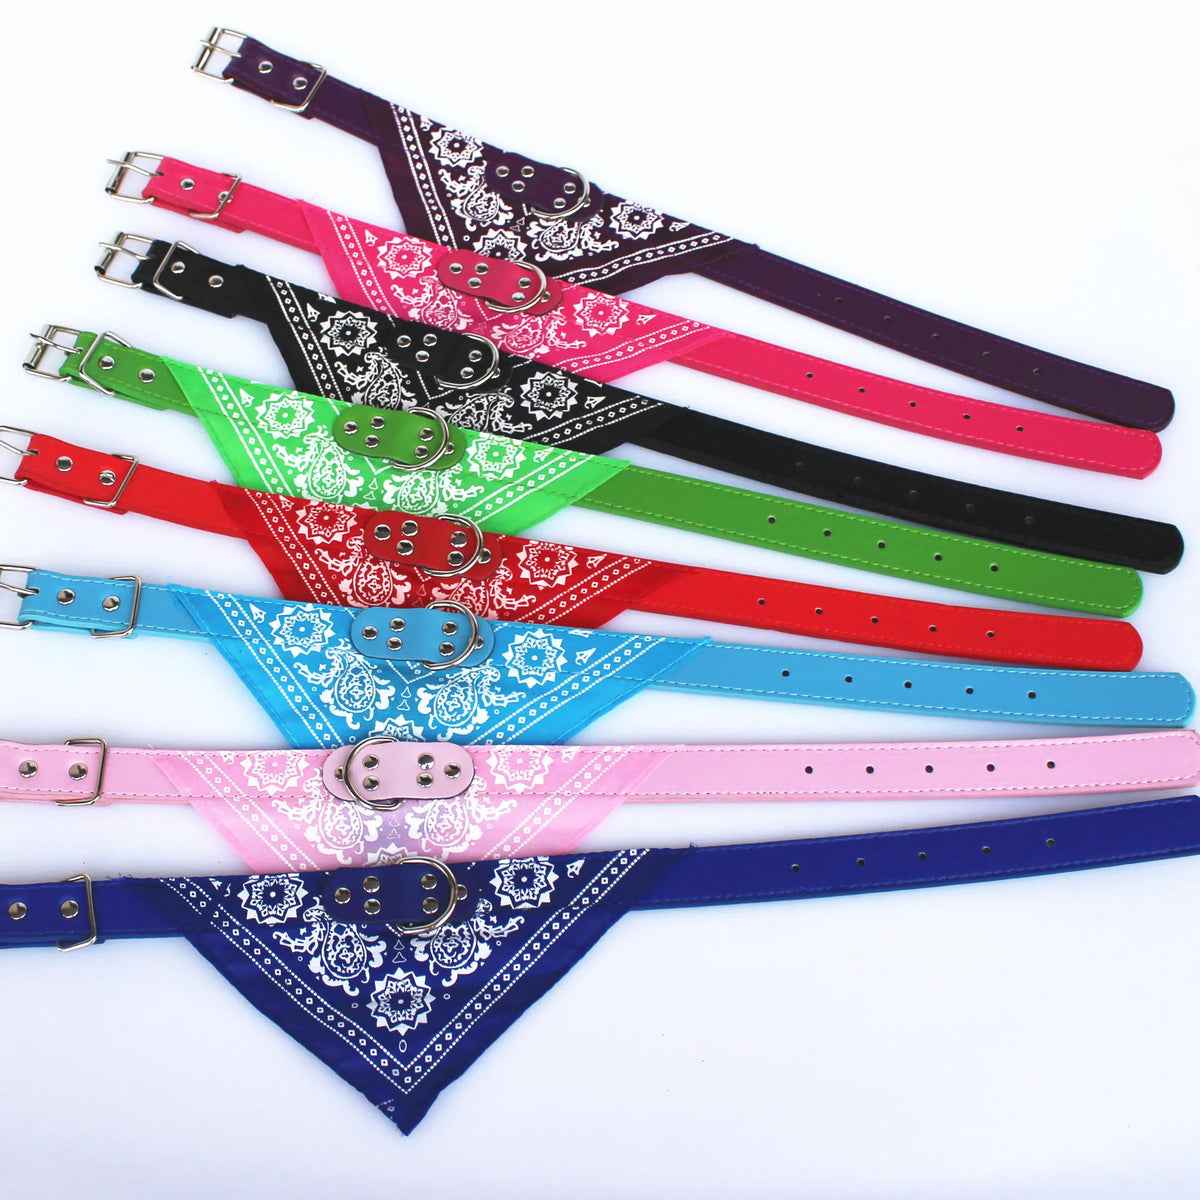 Adorably Chic: Adjustable Small Dog Collars with Cute Print Scarf Design